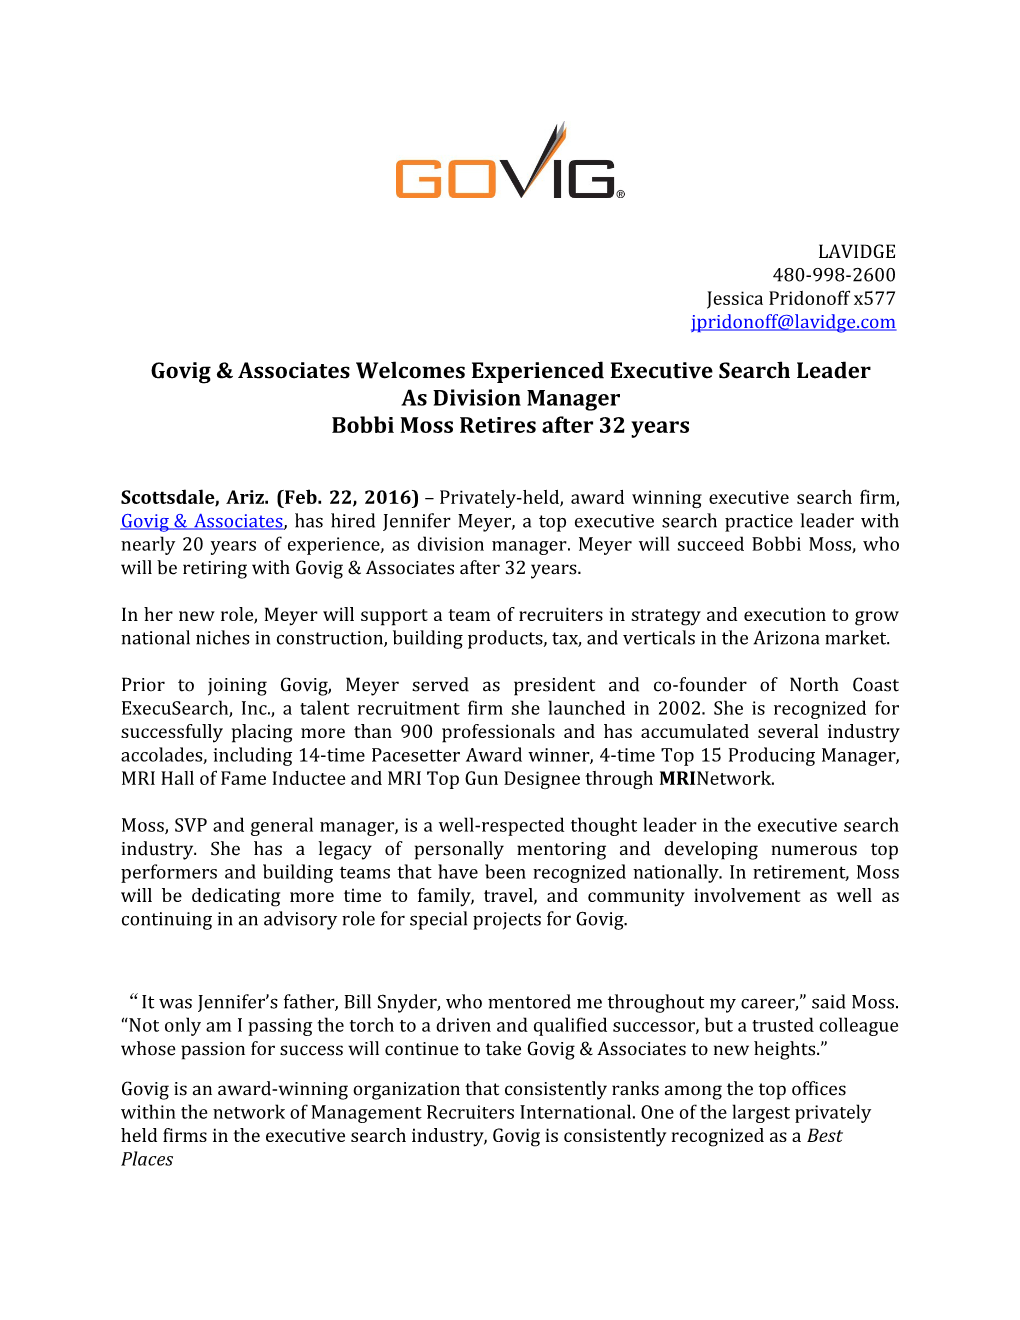 Govig & Associates Welcomes Experienced Executive Search Leader